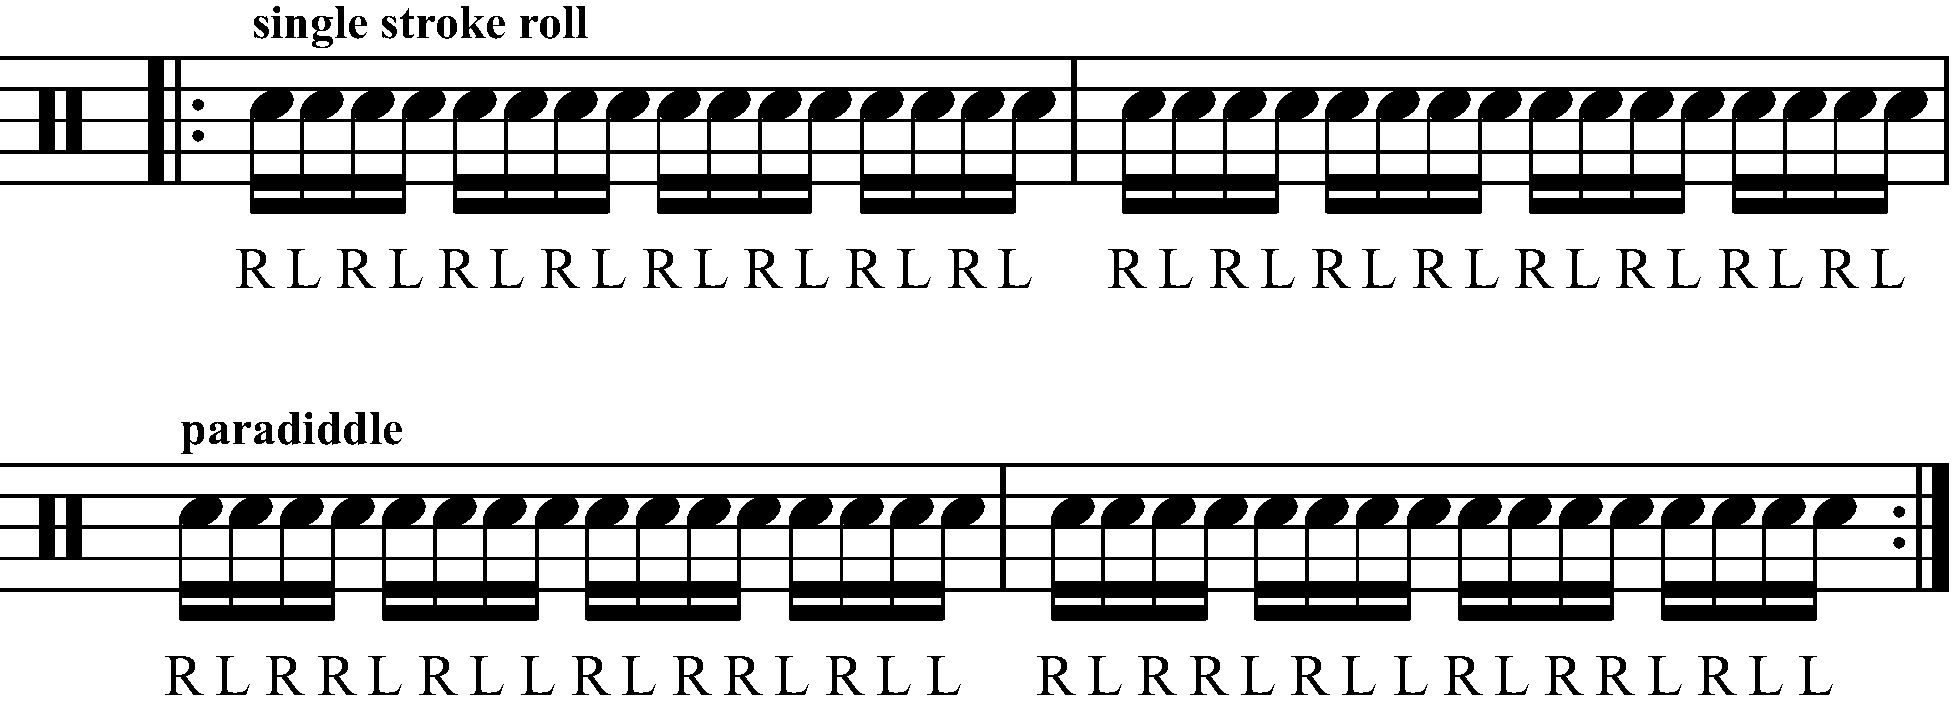 Singles To Paradiddles As Sixteenth Notes